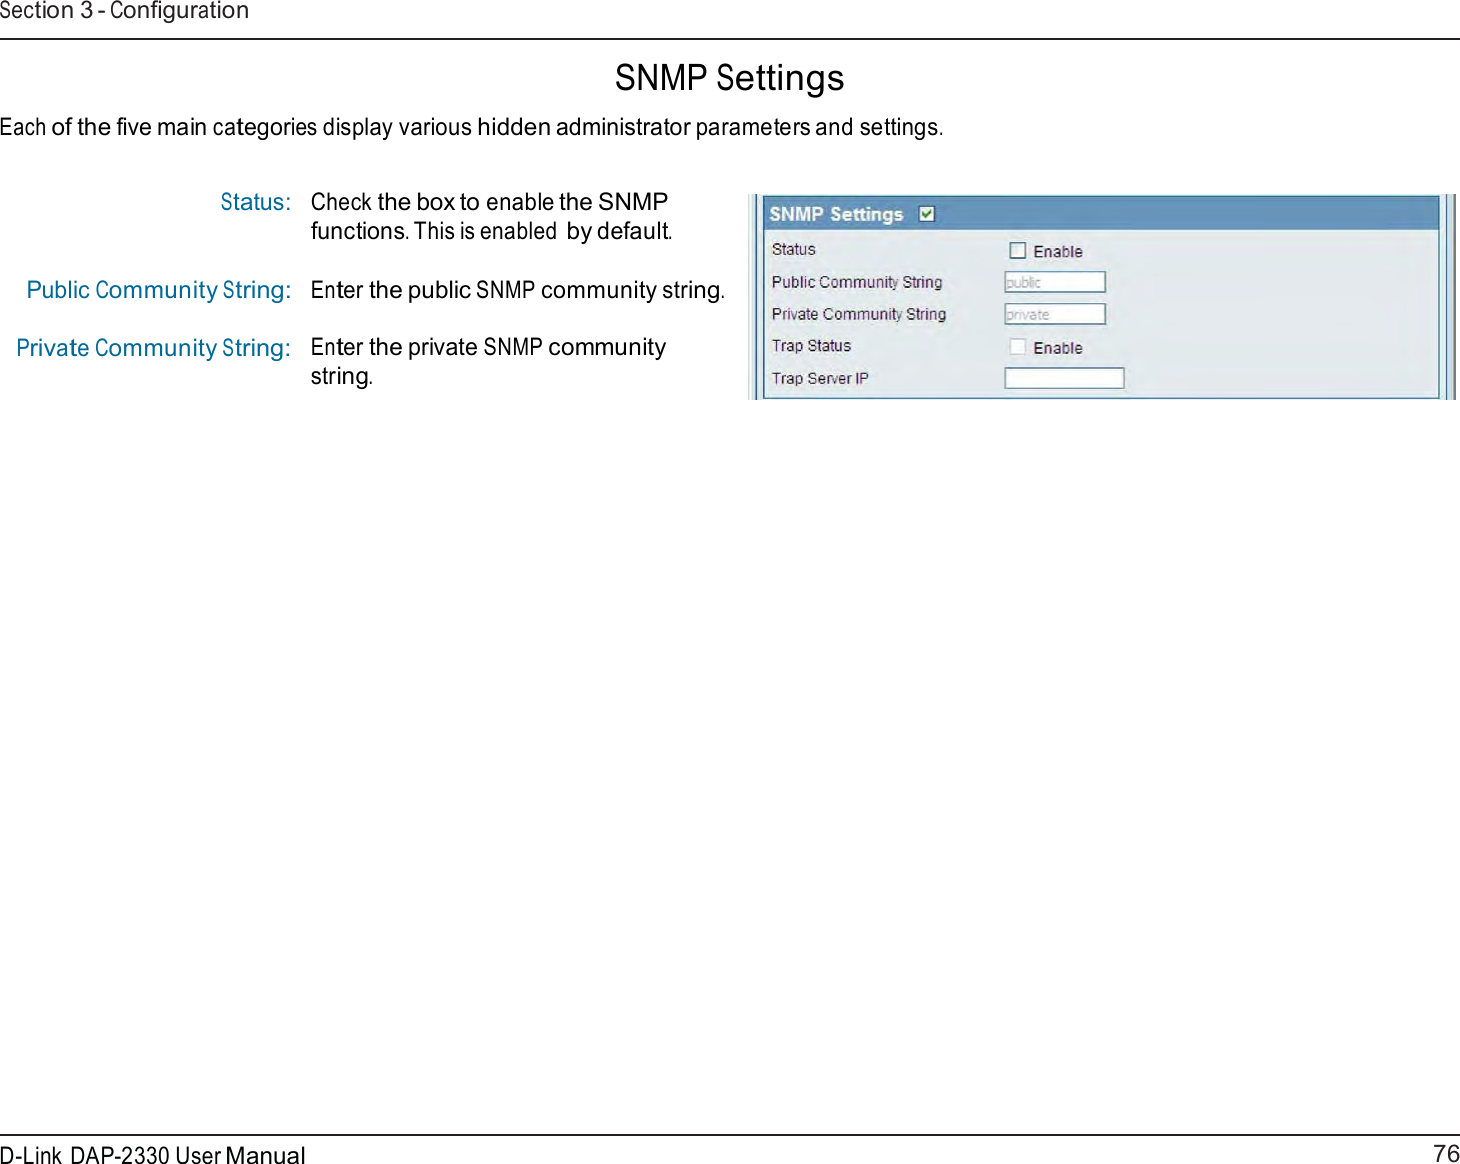 76 D-Link DAP-2330 User ManualSection 3 - Configuration      SNMP Settings  Each of the five main categories display various hidden administrator parameters and settings.   Status:    Public Community String: Private Community String: Check the box to enable the SNMP functions. This is enabled by default. Enter the public SNMP community string. Enter the private SNMP community string. 